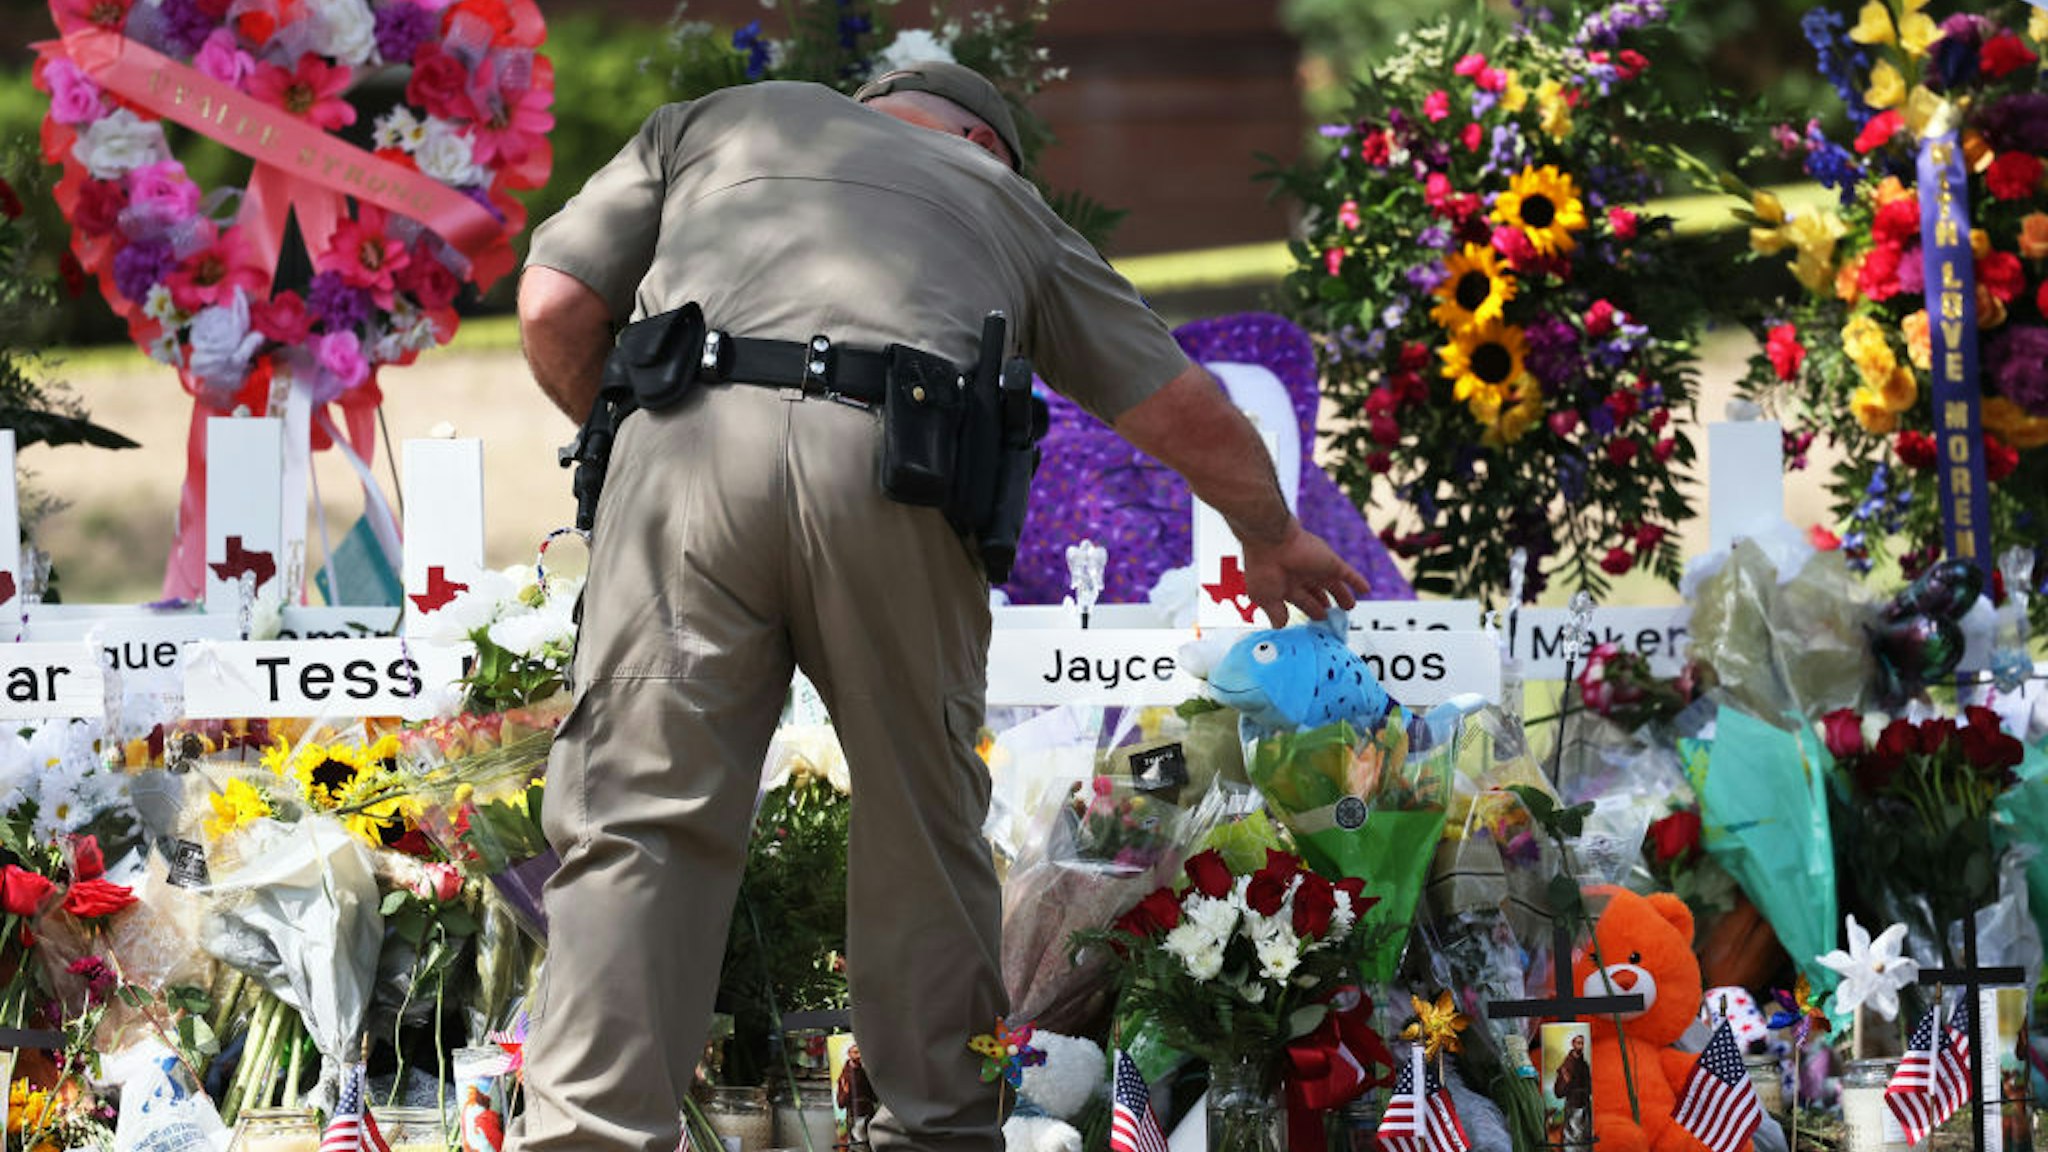 UVALDE, TEXAS - MAY 27: A Texas Highway Patrol Trooper places an item at a memorial for victims of Tuesday's mass shooting at Robb Elementary School on May 27, 2022 in Uvalde, Texas. Steven C. McCraw, Director and Colonel of the Texas Department of Public Safety, held a press conference to give an update on the investigation into Tuesday's mass shooting where 19 children and two adults were killed at Robb Elementary School, and admitted that it was the wrong decision to wait and not breach the classroom door as soon as police officers were inside the elementary school. (Photo by Michael M. Santiago/Getty Images)